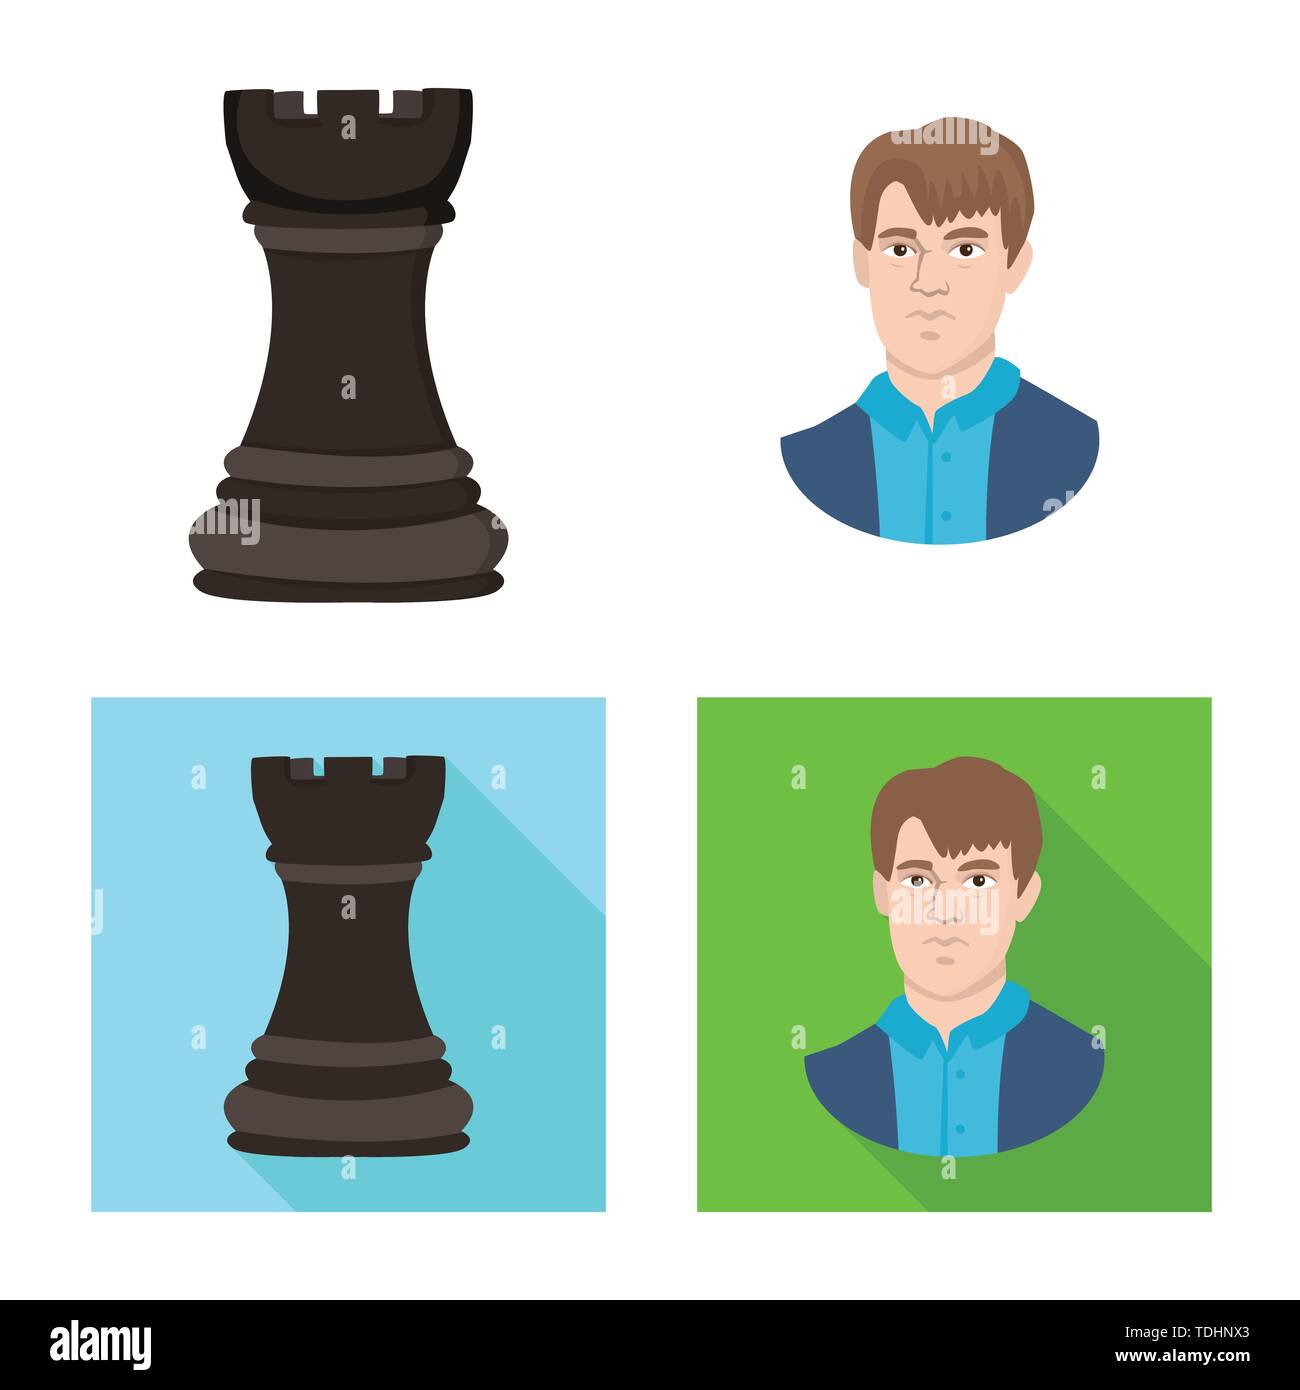 rook,man,black,face,castle,male,tower,young,network,guy,figure,person,goal,hair,action,men,sport,portrait,success, avatar,checkmate,thin,club,target,chess,game,piece,strategy,tactical,play,set,vector,icon,illustration,isolated,collection,design,element  ...